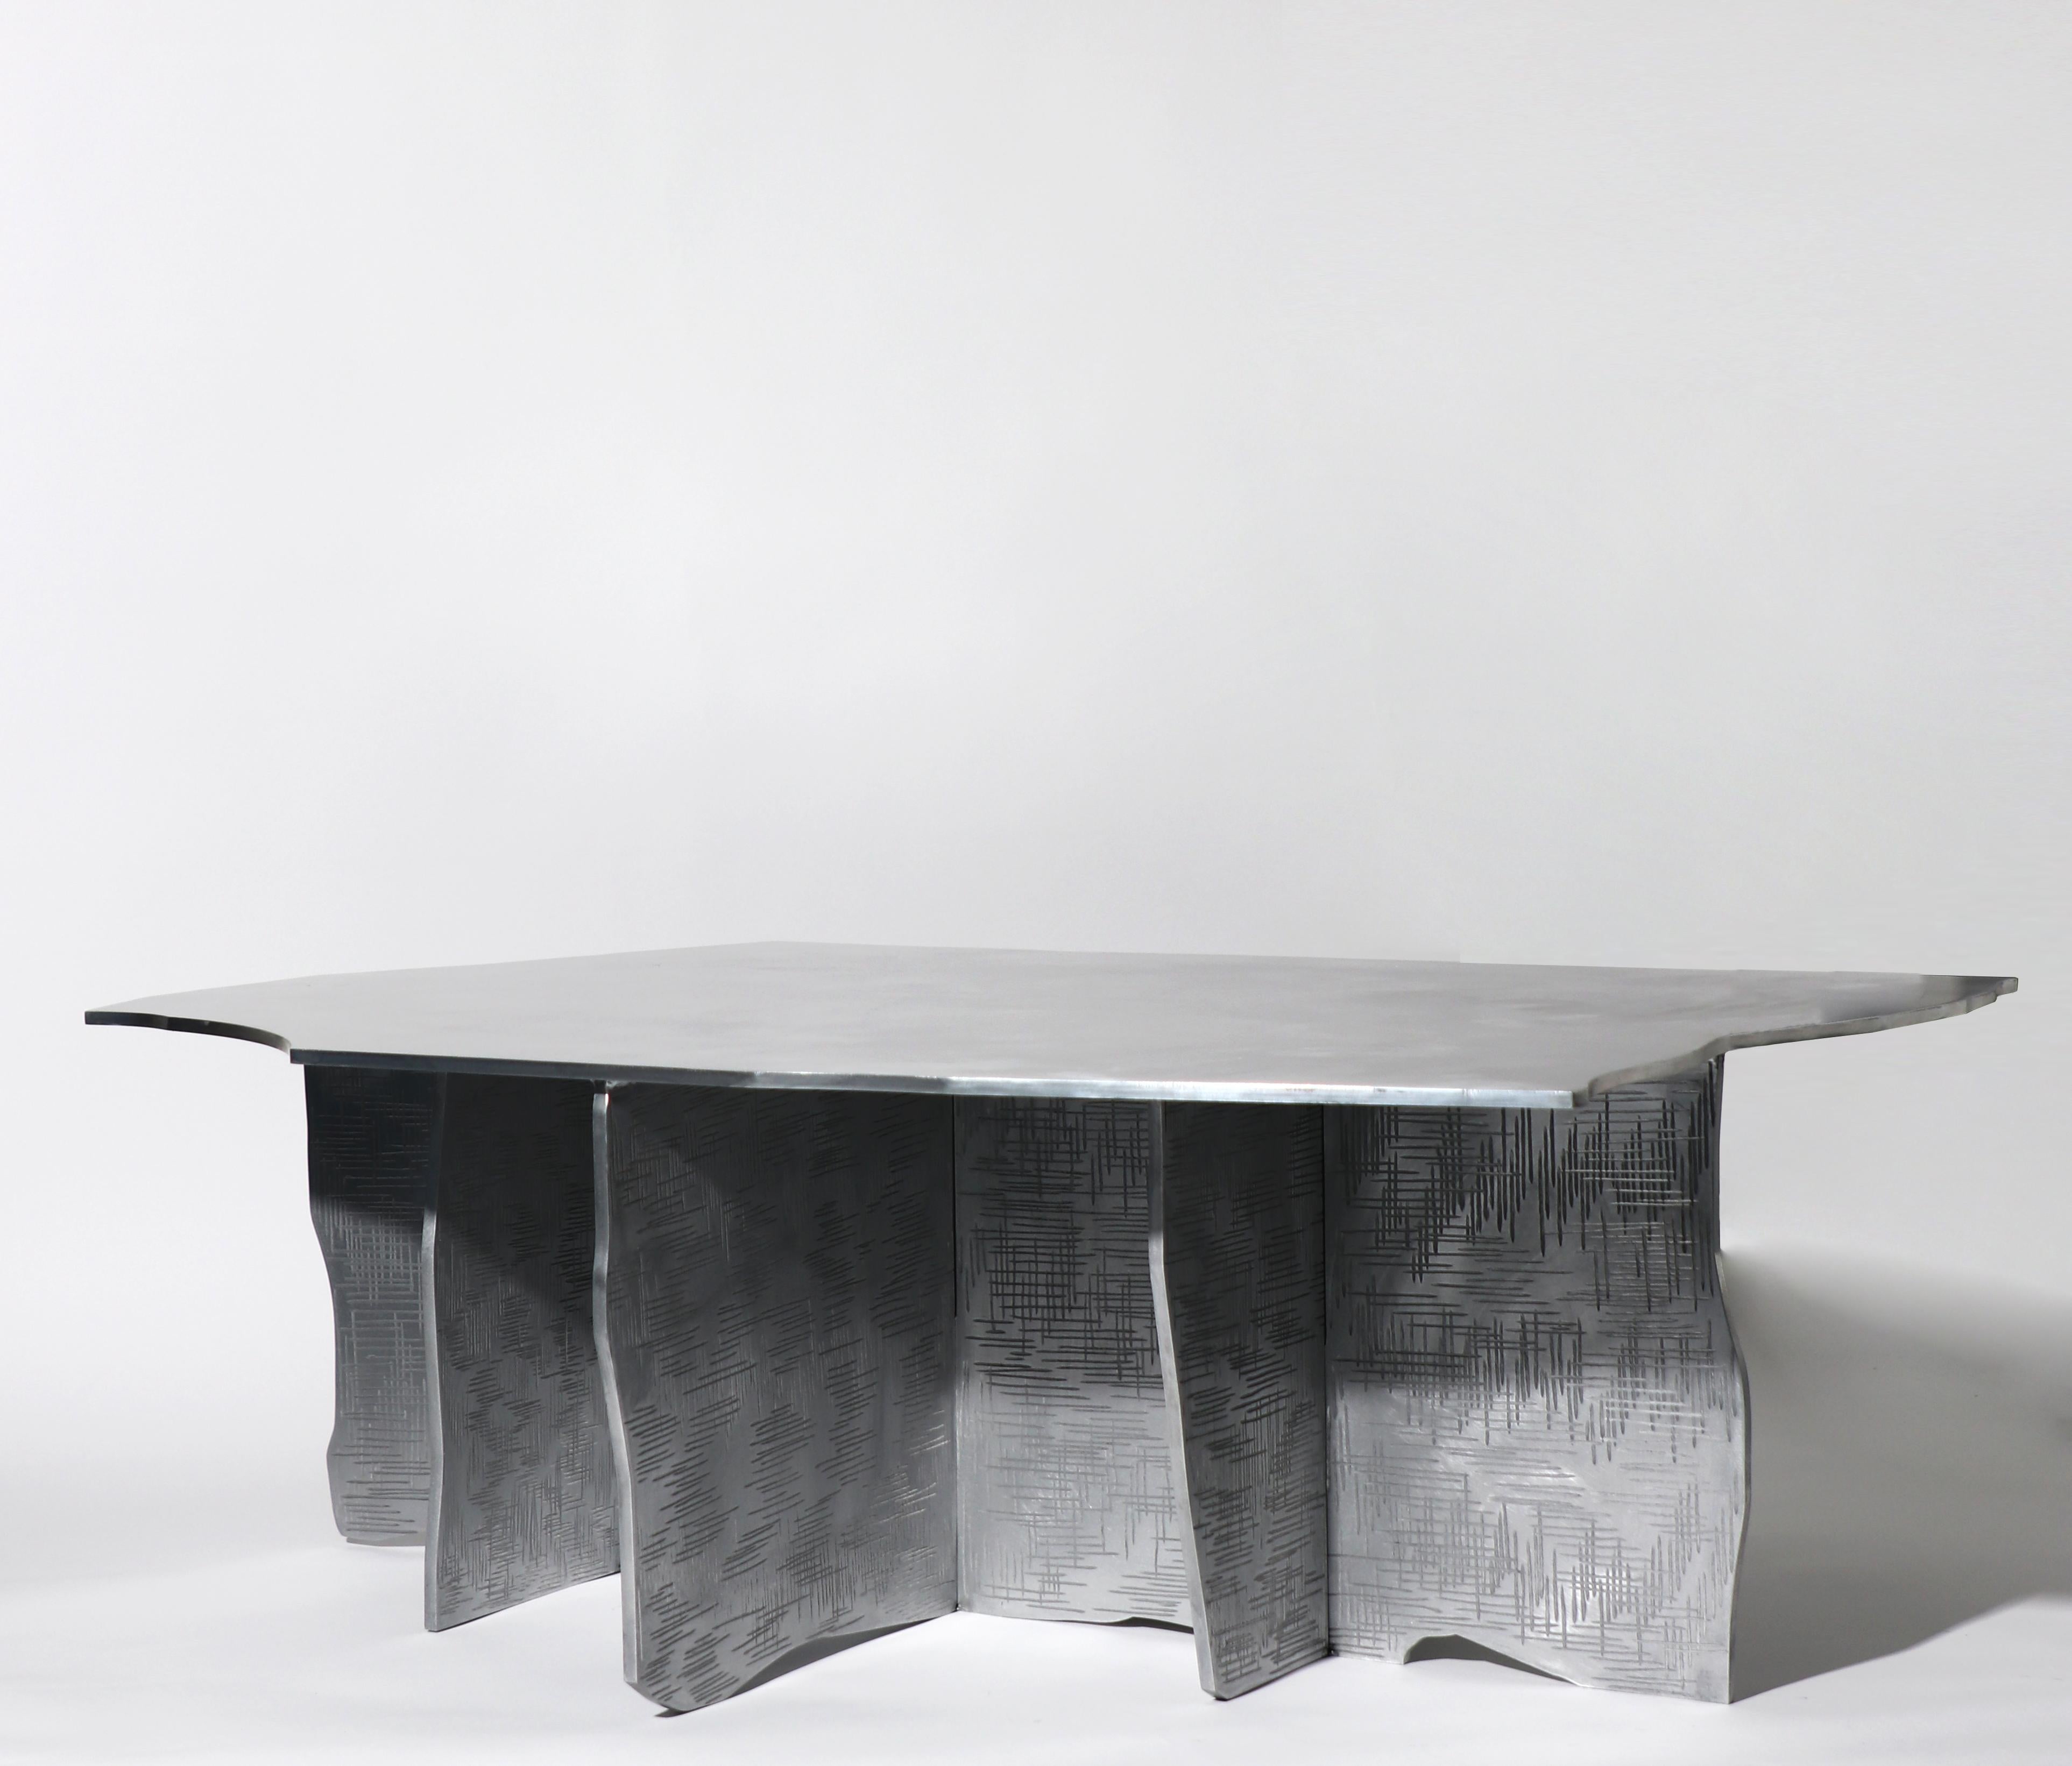 Cure 06 low table by Sundo Yoon
Dimensions: D 68 x W 95 x H 33 cm
Materials: Scratch and hand brushed on Aluminum.

Cure Series - Sundo Yoon
'The Cure Series is a series of works by designer Sundo Yoon based in Korea.
 The Cure series feels